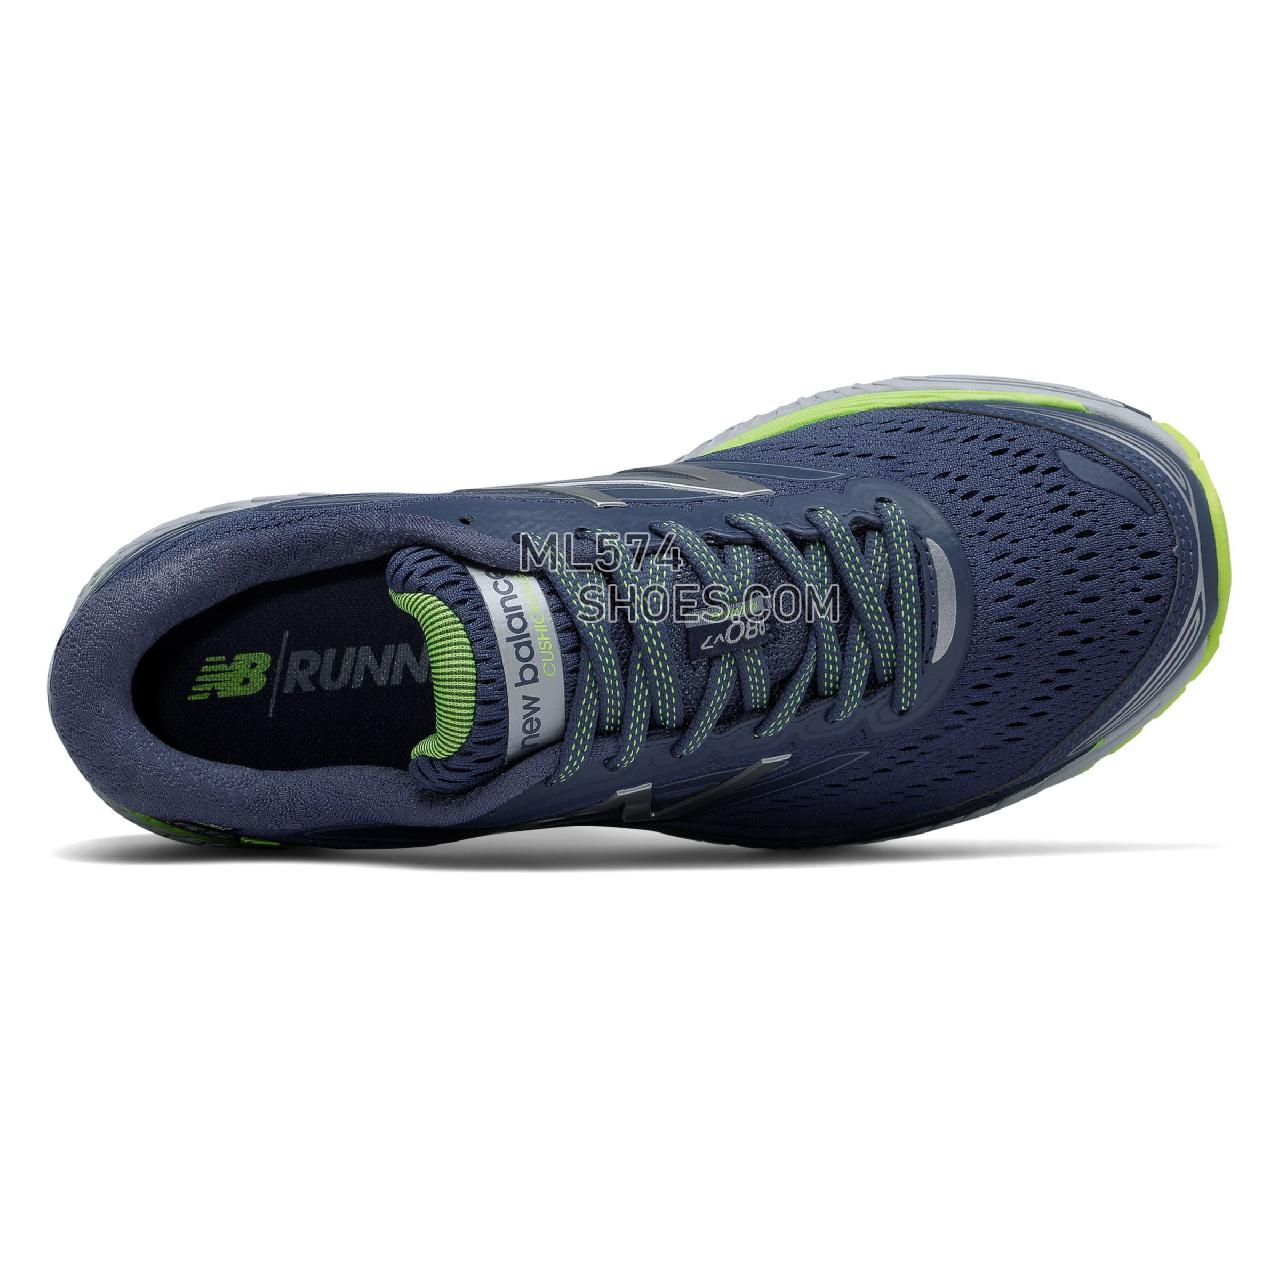 New Balance 880v7 GTX - Women's 880 - Running Vintage Indigo with Cyclone and Lime Glo - W880BX7